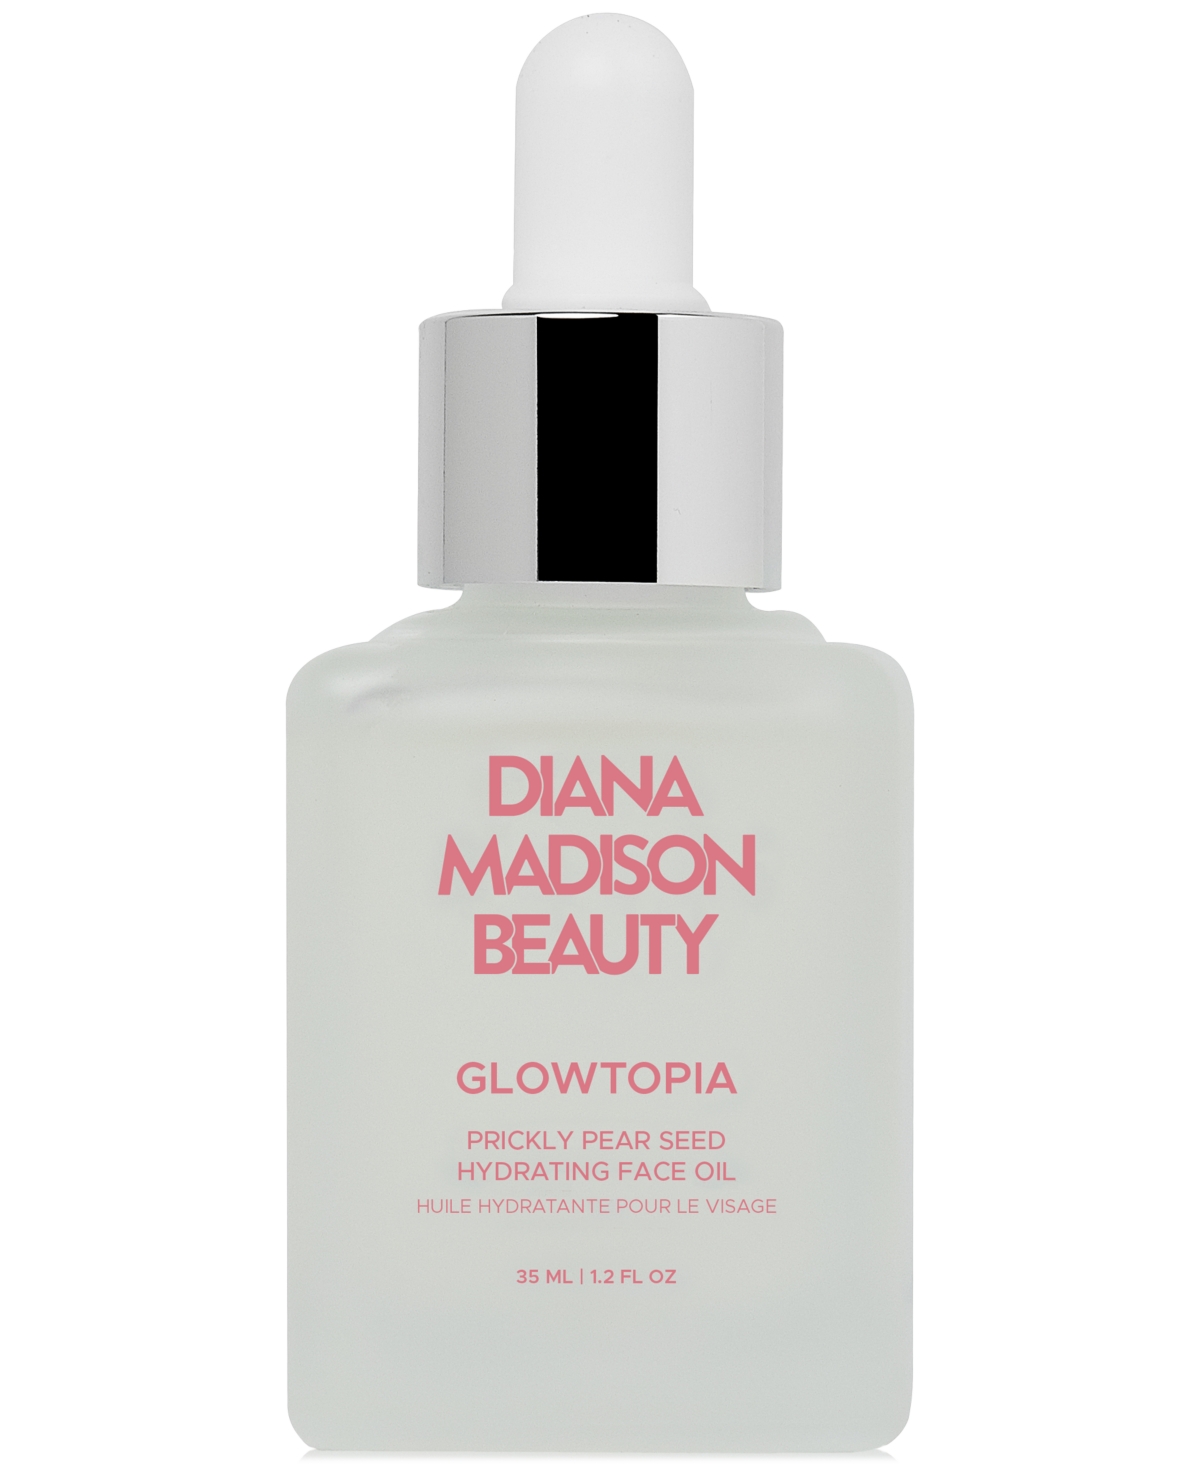 Diana Madison Beauty Glowtopia Prickly Pear Seed Hydrating Face Oil